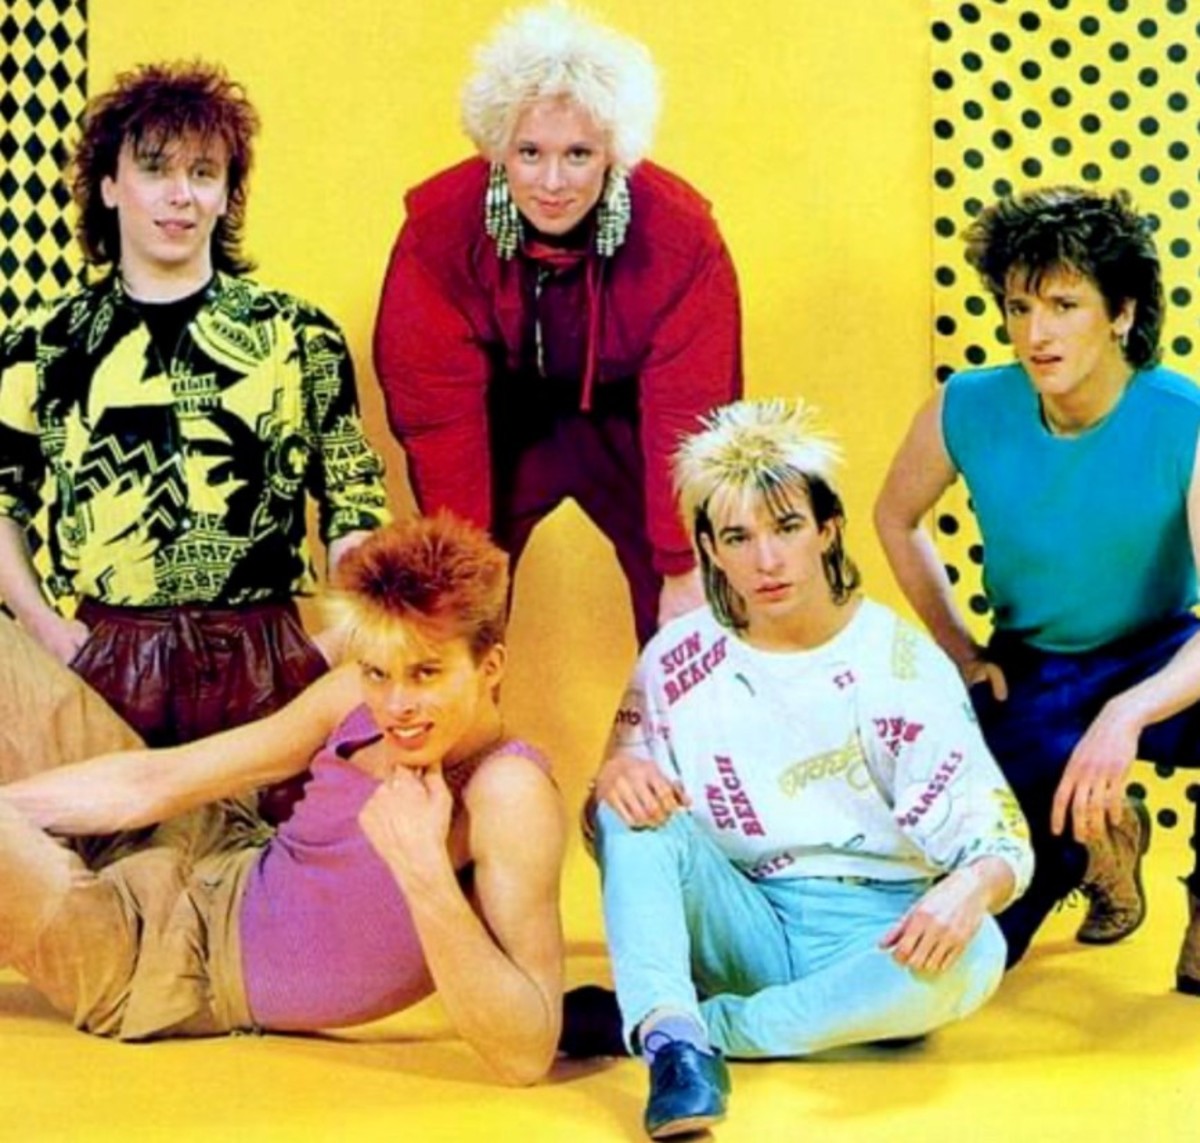 Kajagoogoo publicity photo, 1983, Limahl seated in a white shirt, courtesy Facebook-Limahl Official